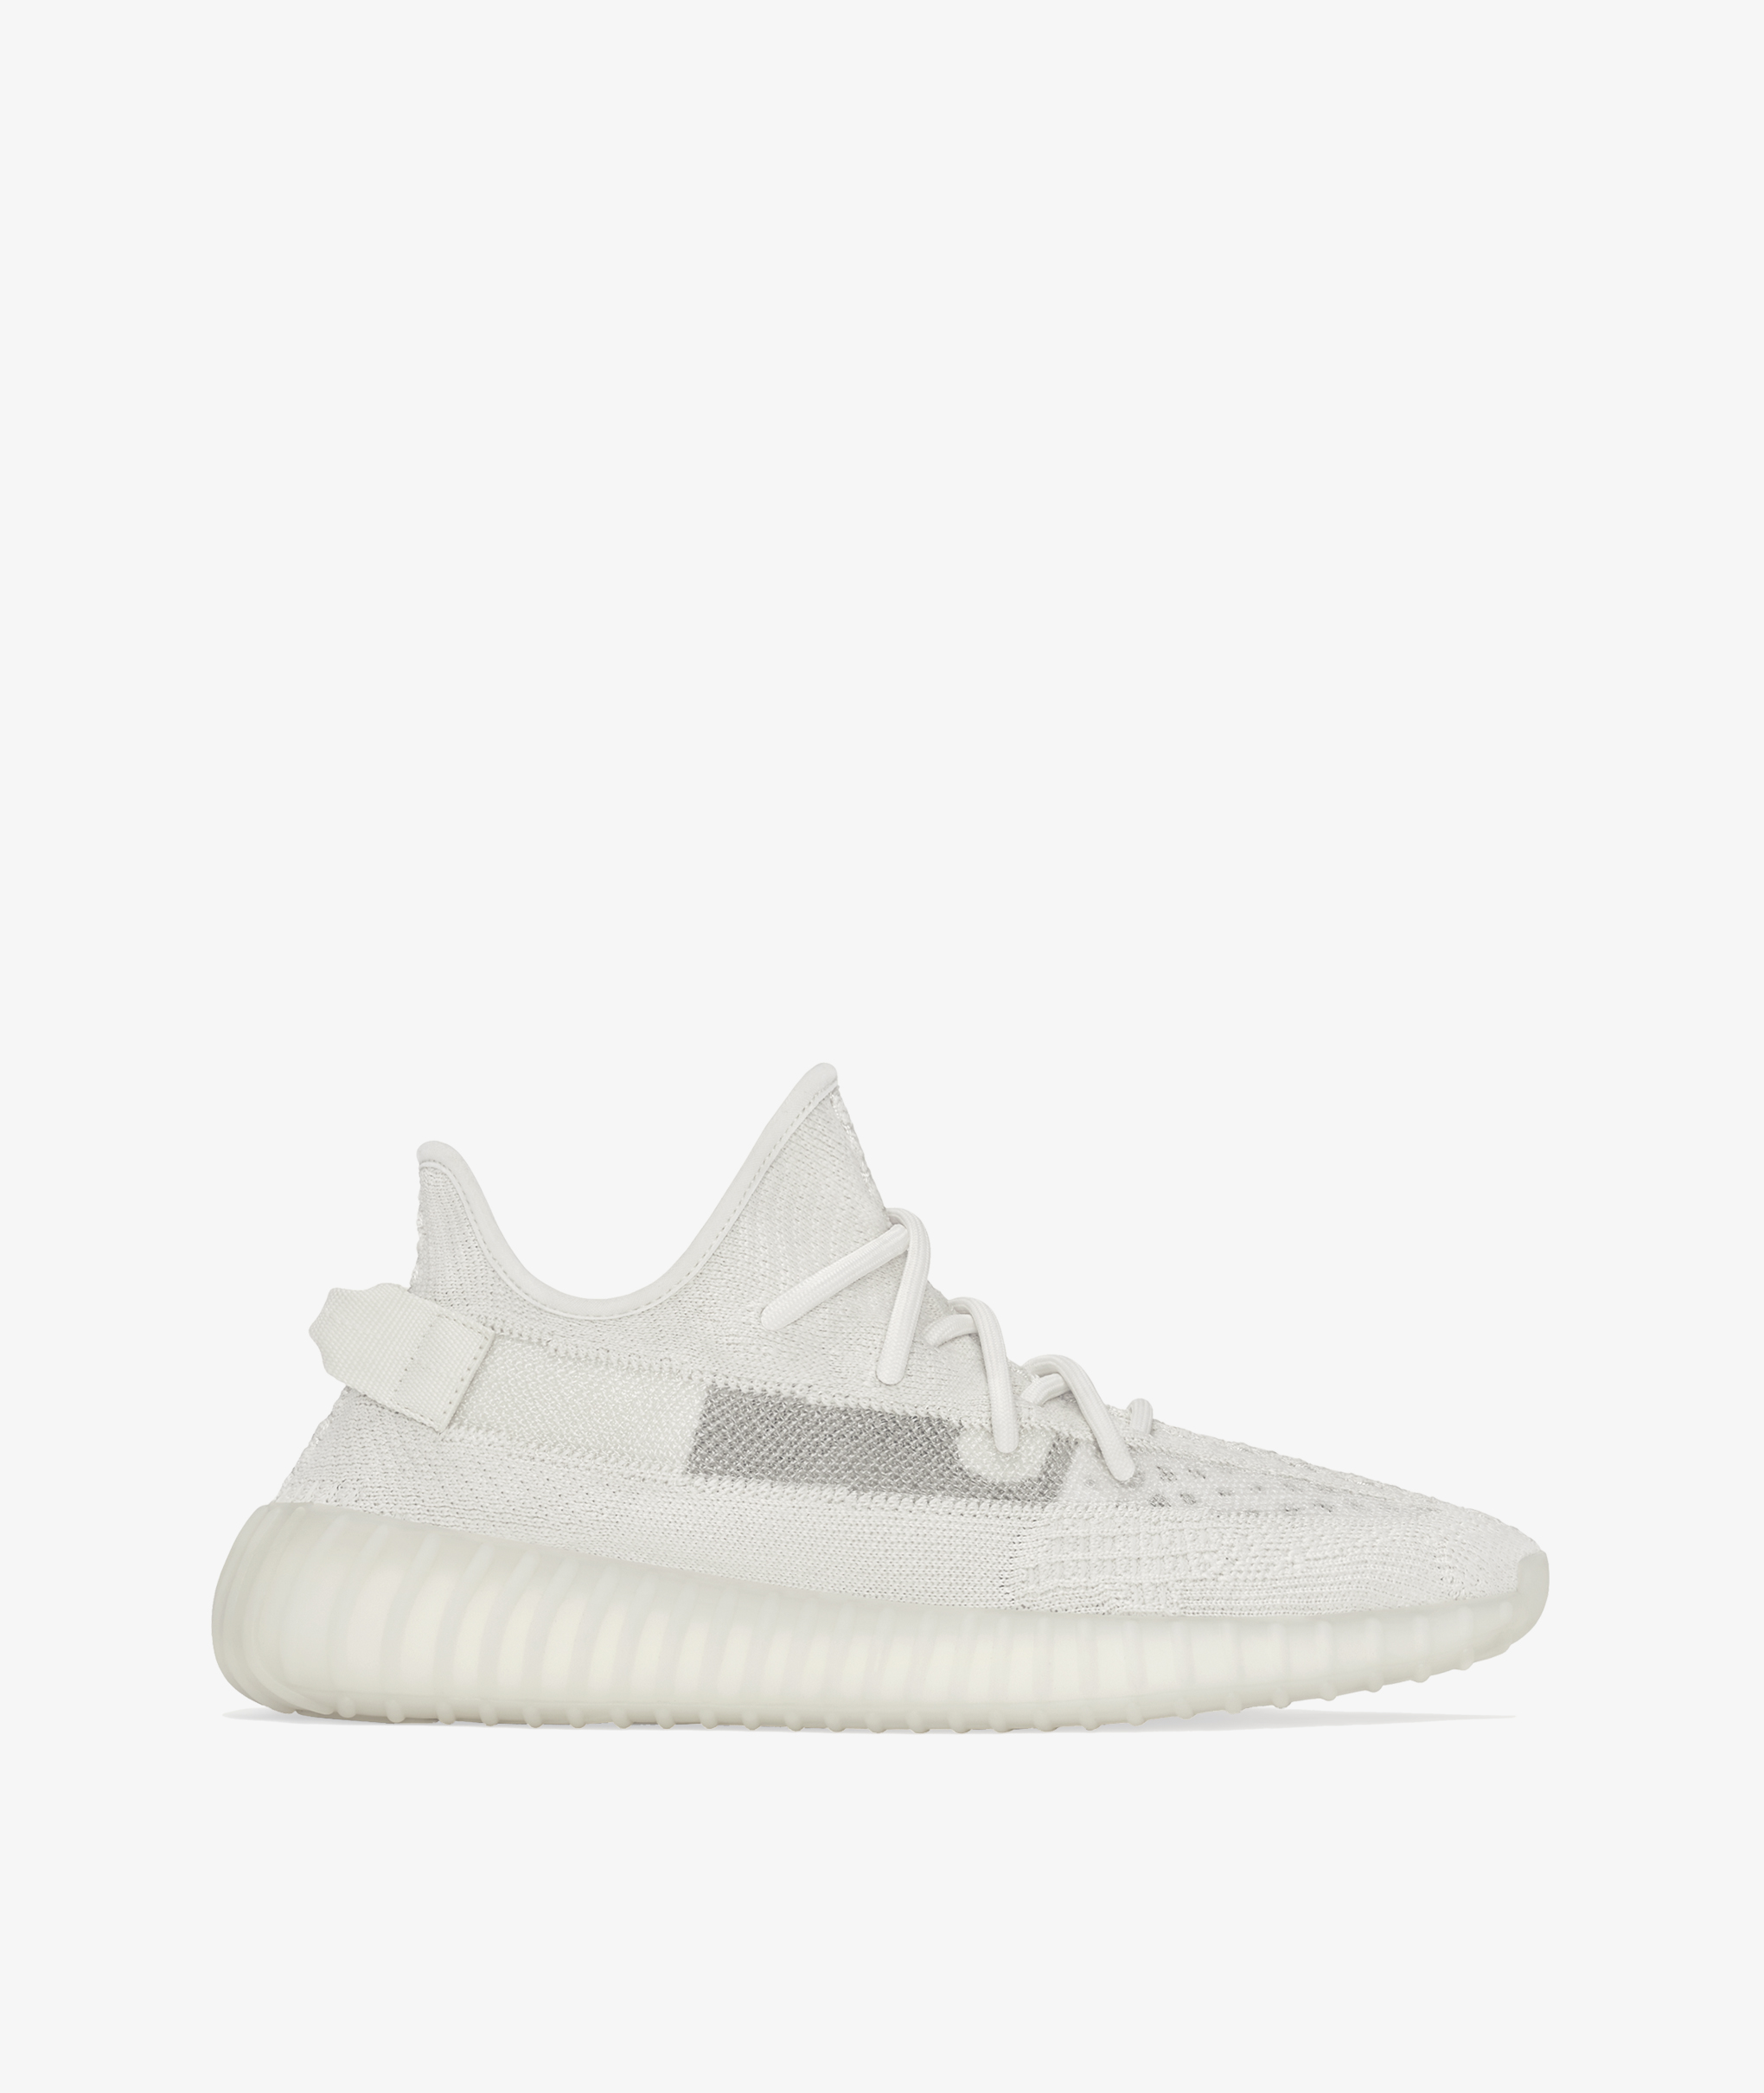 ufuldstændig At redigere tandlæge Norse Store | Shipping Worldwide - Sneakers - Adidas Yeezy - Yeezy Boost  350 V2